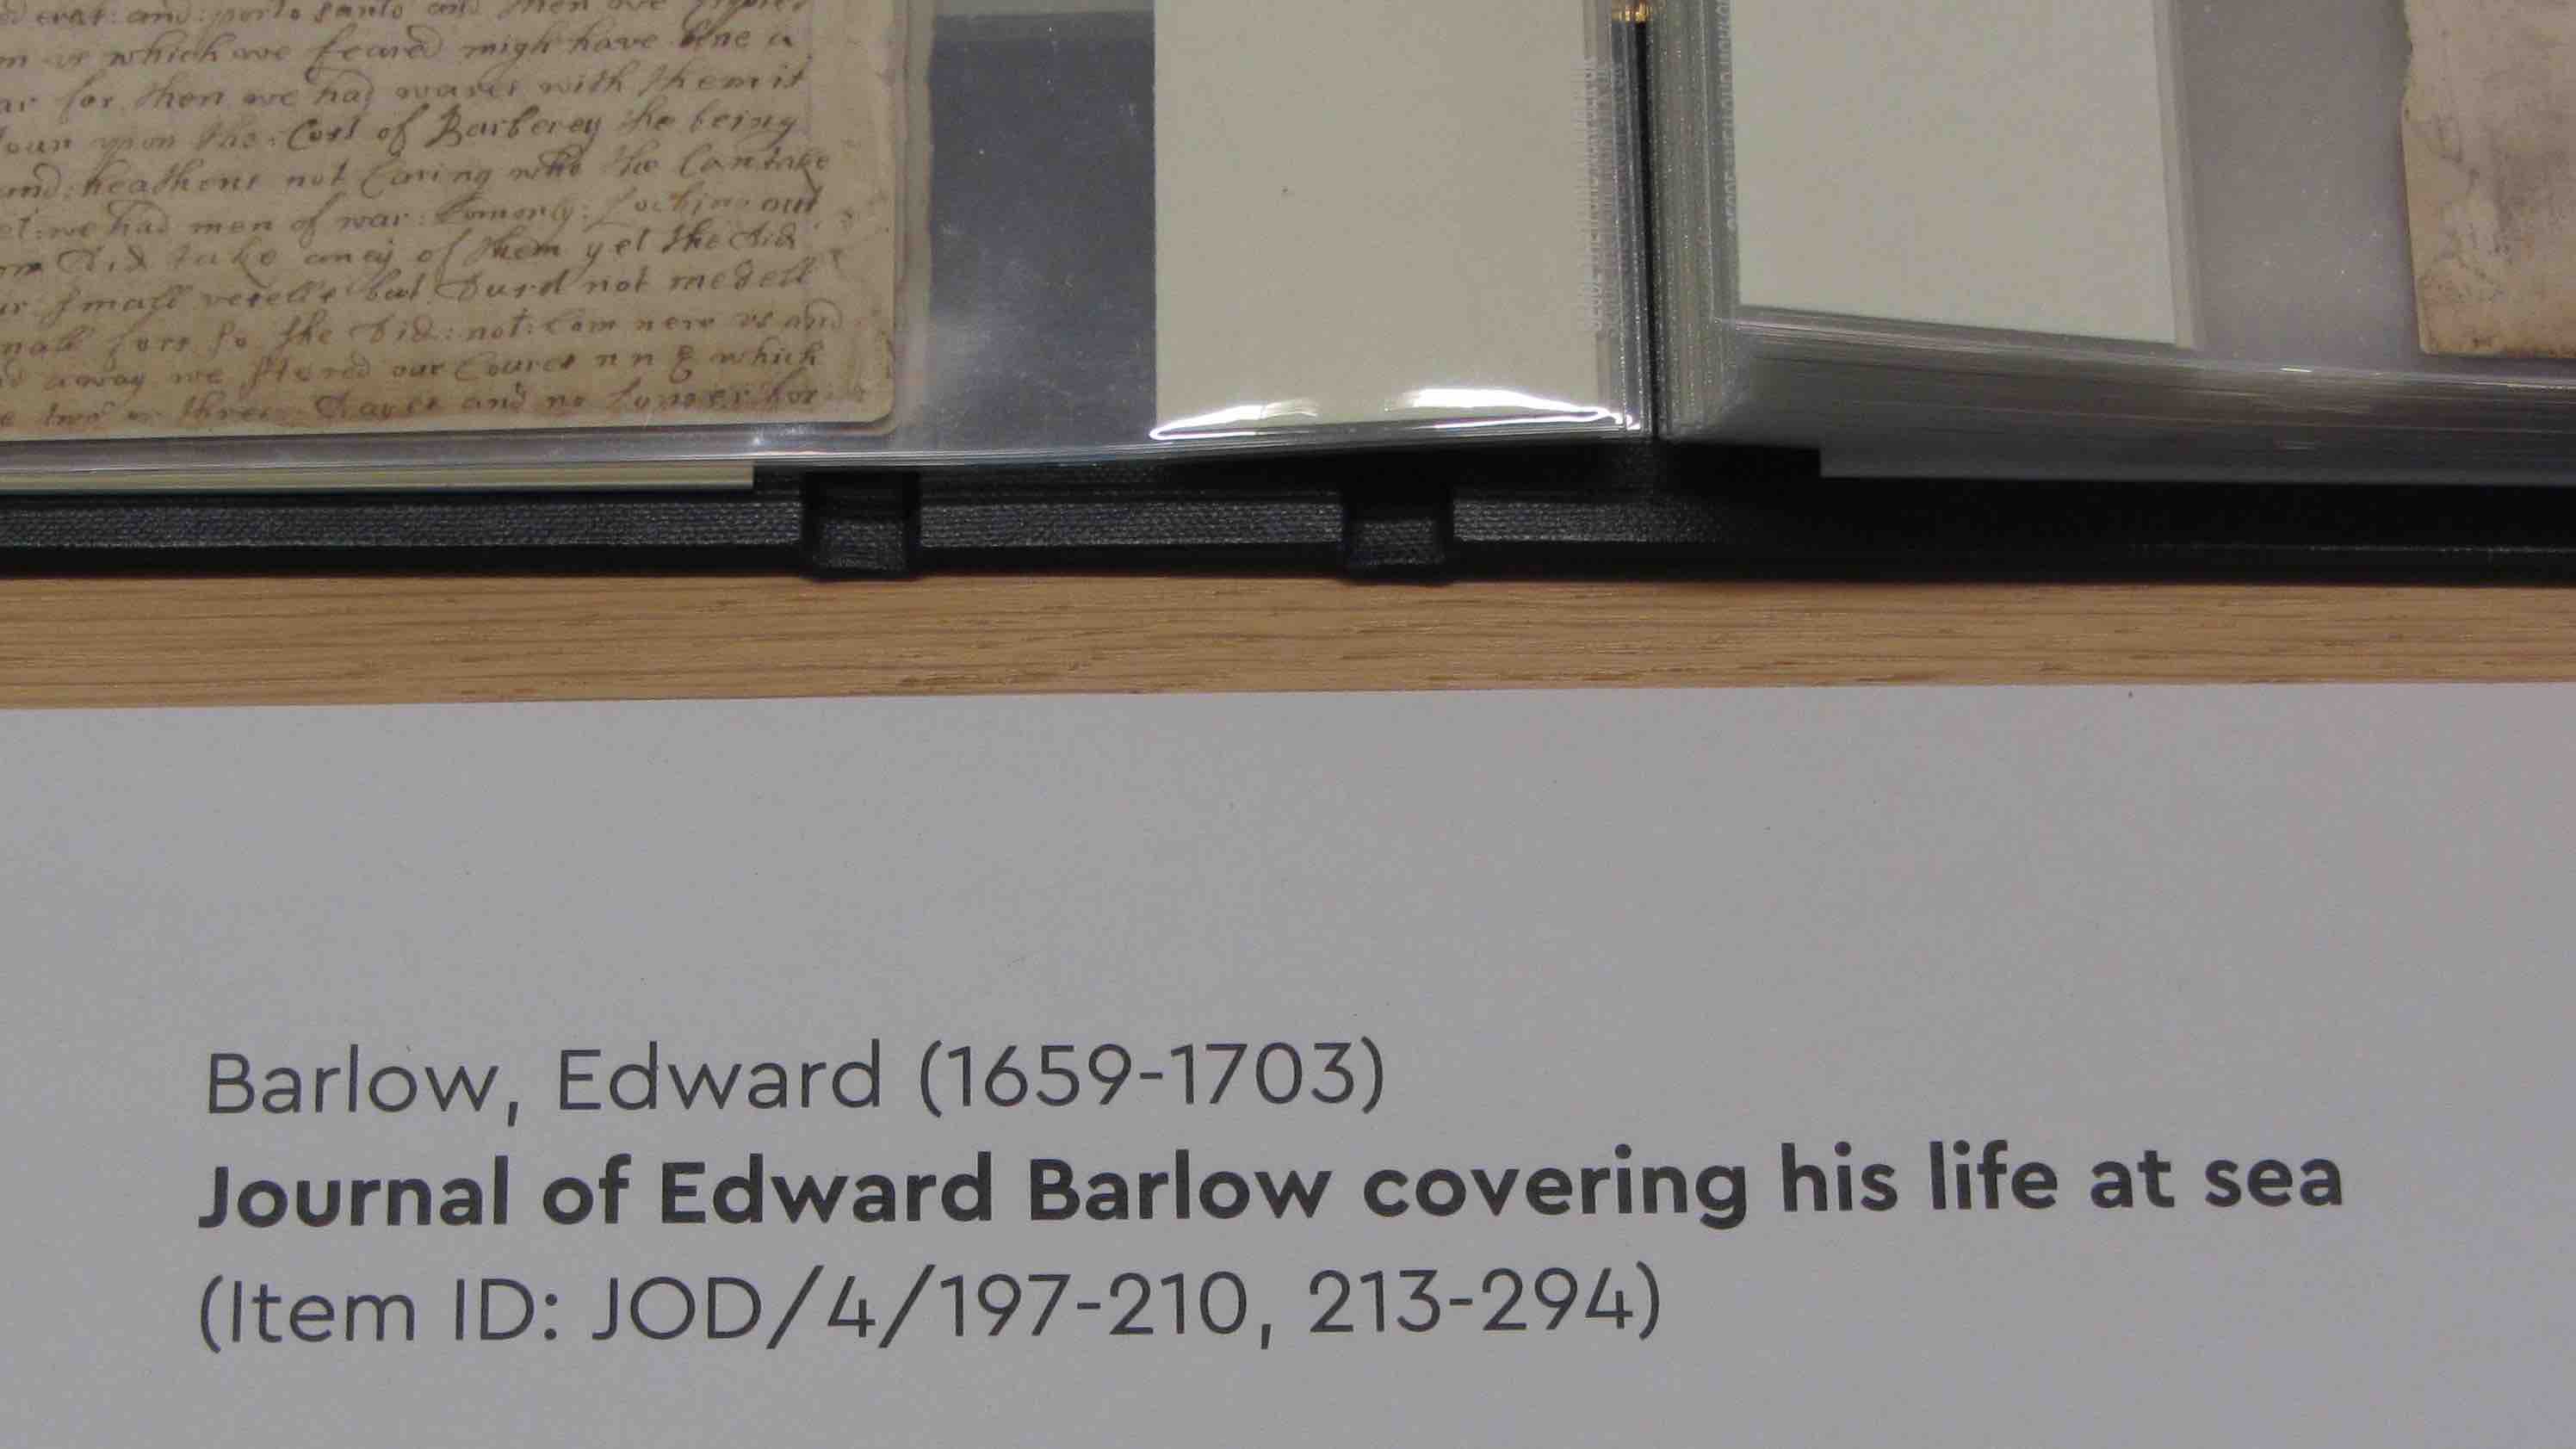 Cropped image of archive description label for Barlow, Edward (1659-1703); Journal of Edward Barlow covering his life at sea